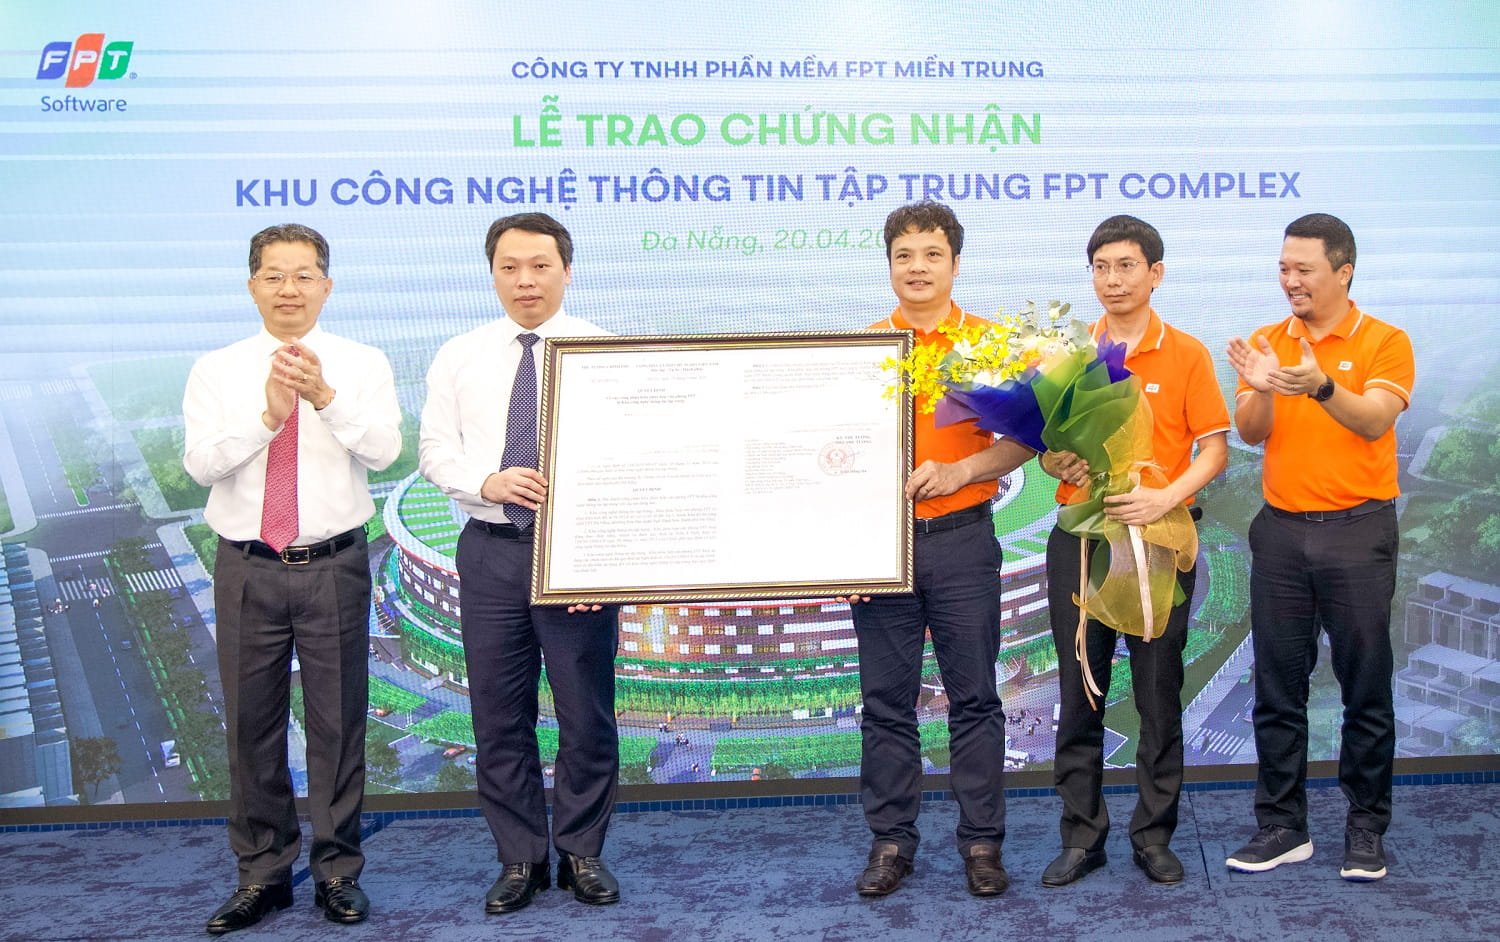   Mr. Nguyen Van Khoa, CEO of FPT (3rd from the right), on behalf of FPT, received the decision recognizing the IT concentrated area.